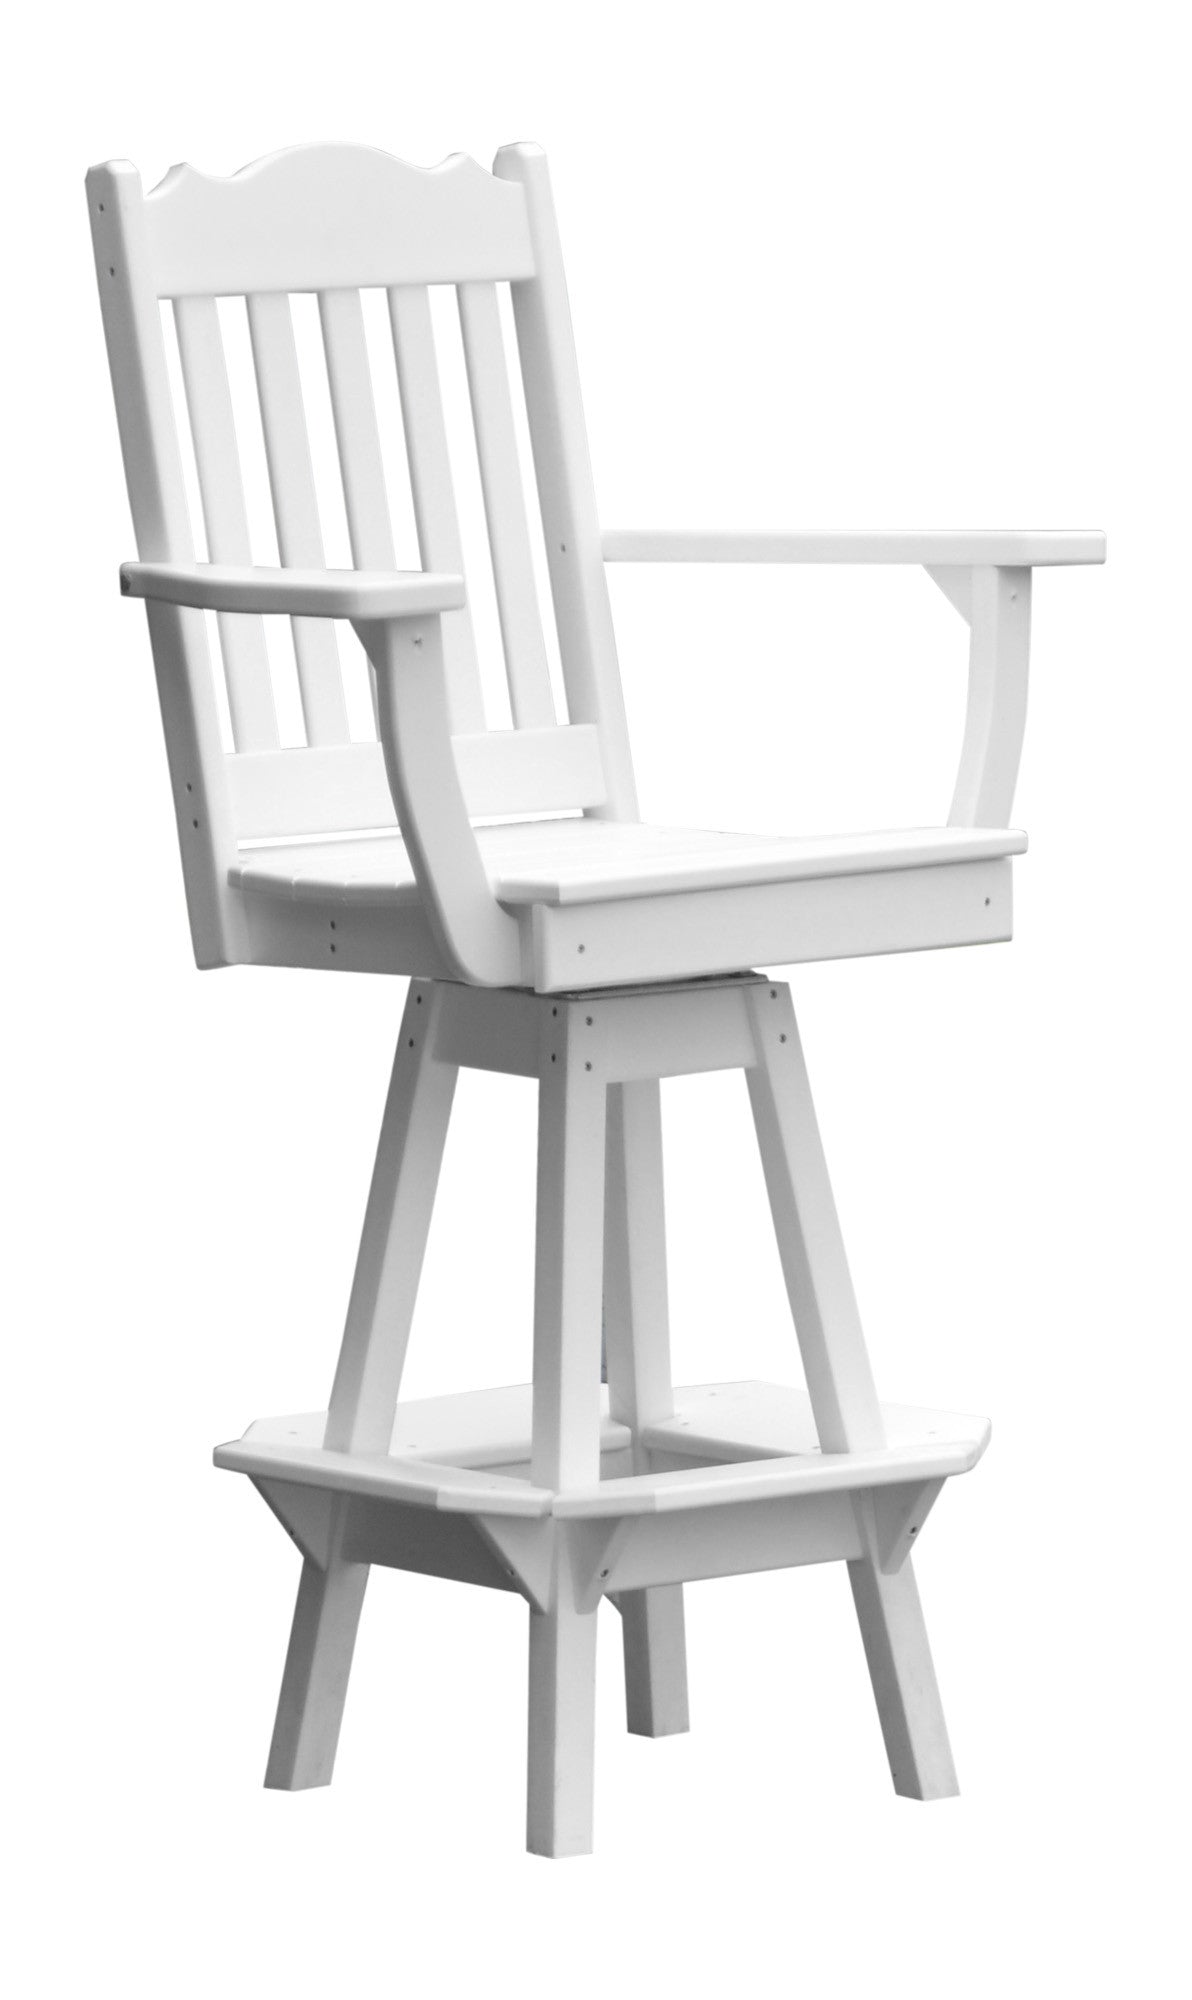 A&L Furniture Company Recycled Plastic Royal Swivel Bar Chair w/ Arms - White